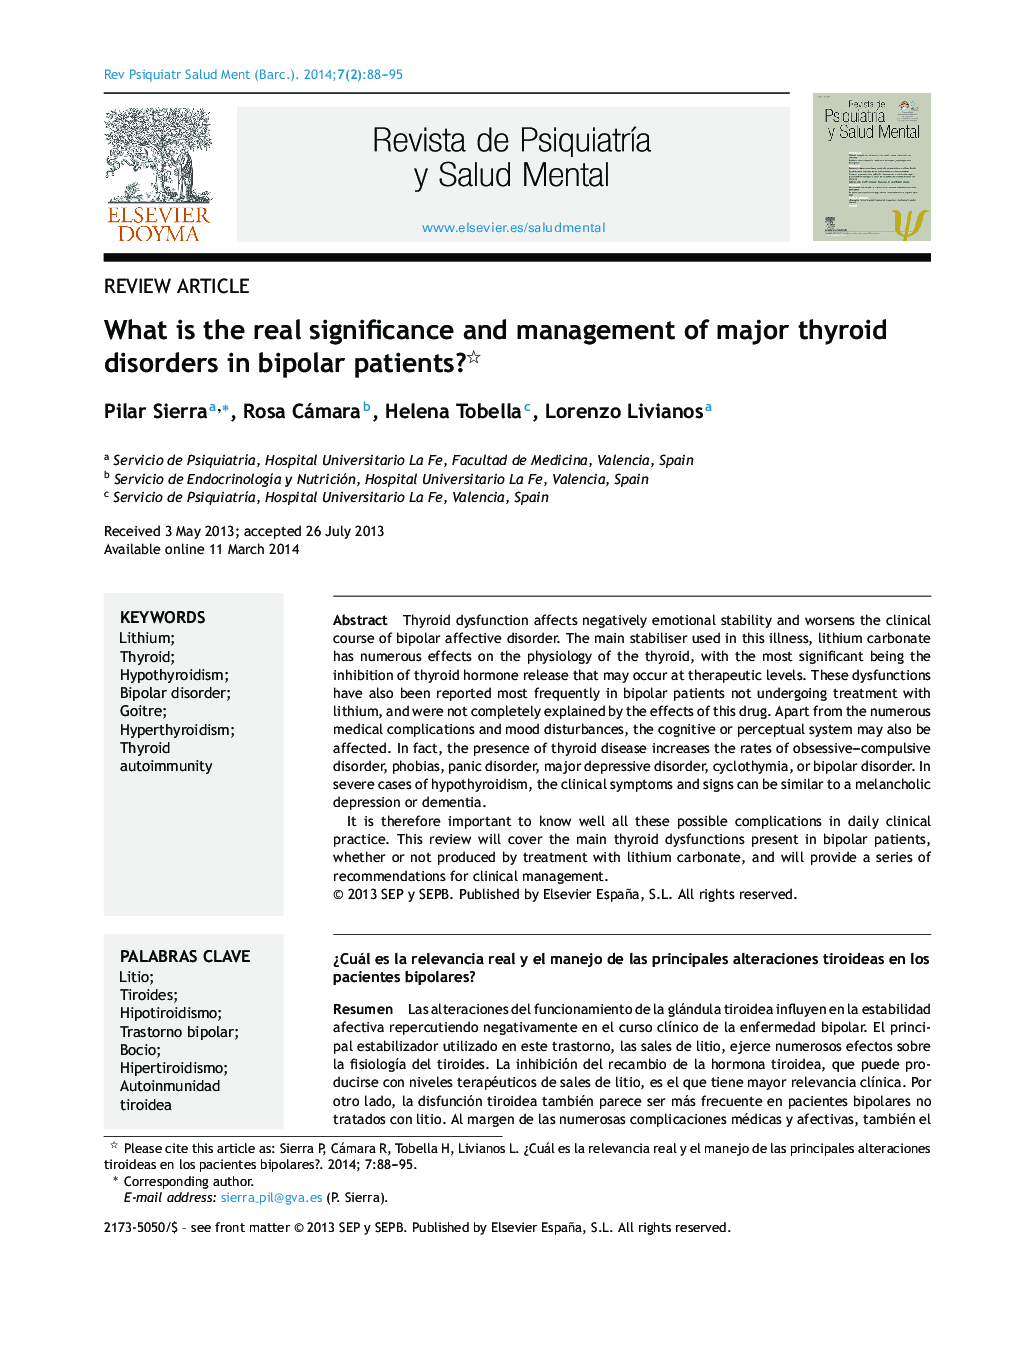 What is the real significance and management of major thyroid disorders in bipolar patients? 